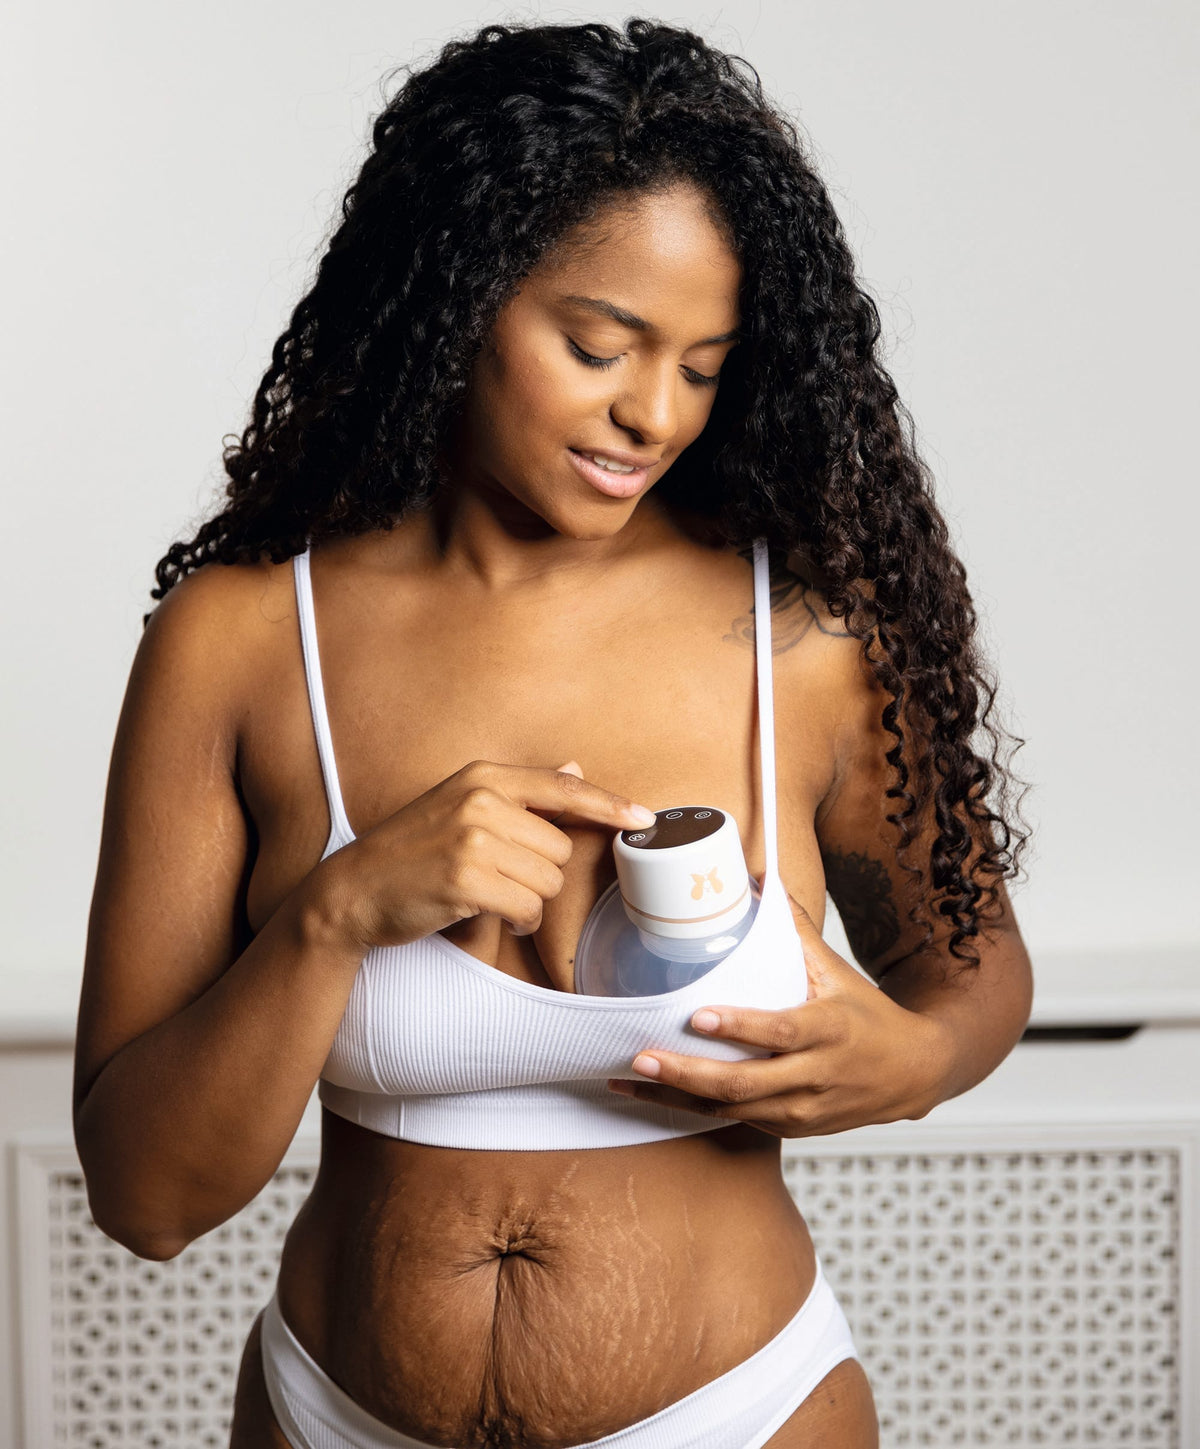 Made for Me™ Wearable Breast Pump